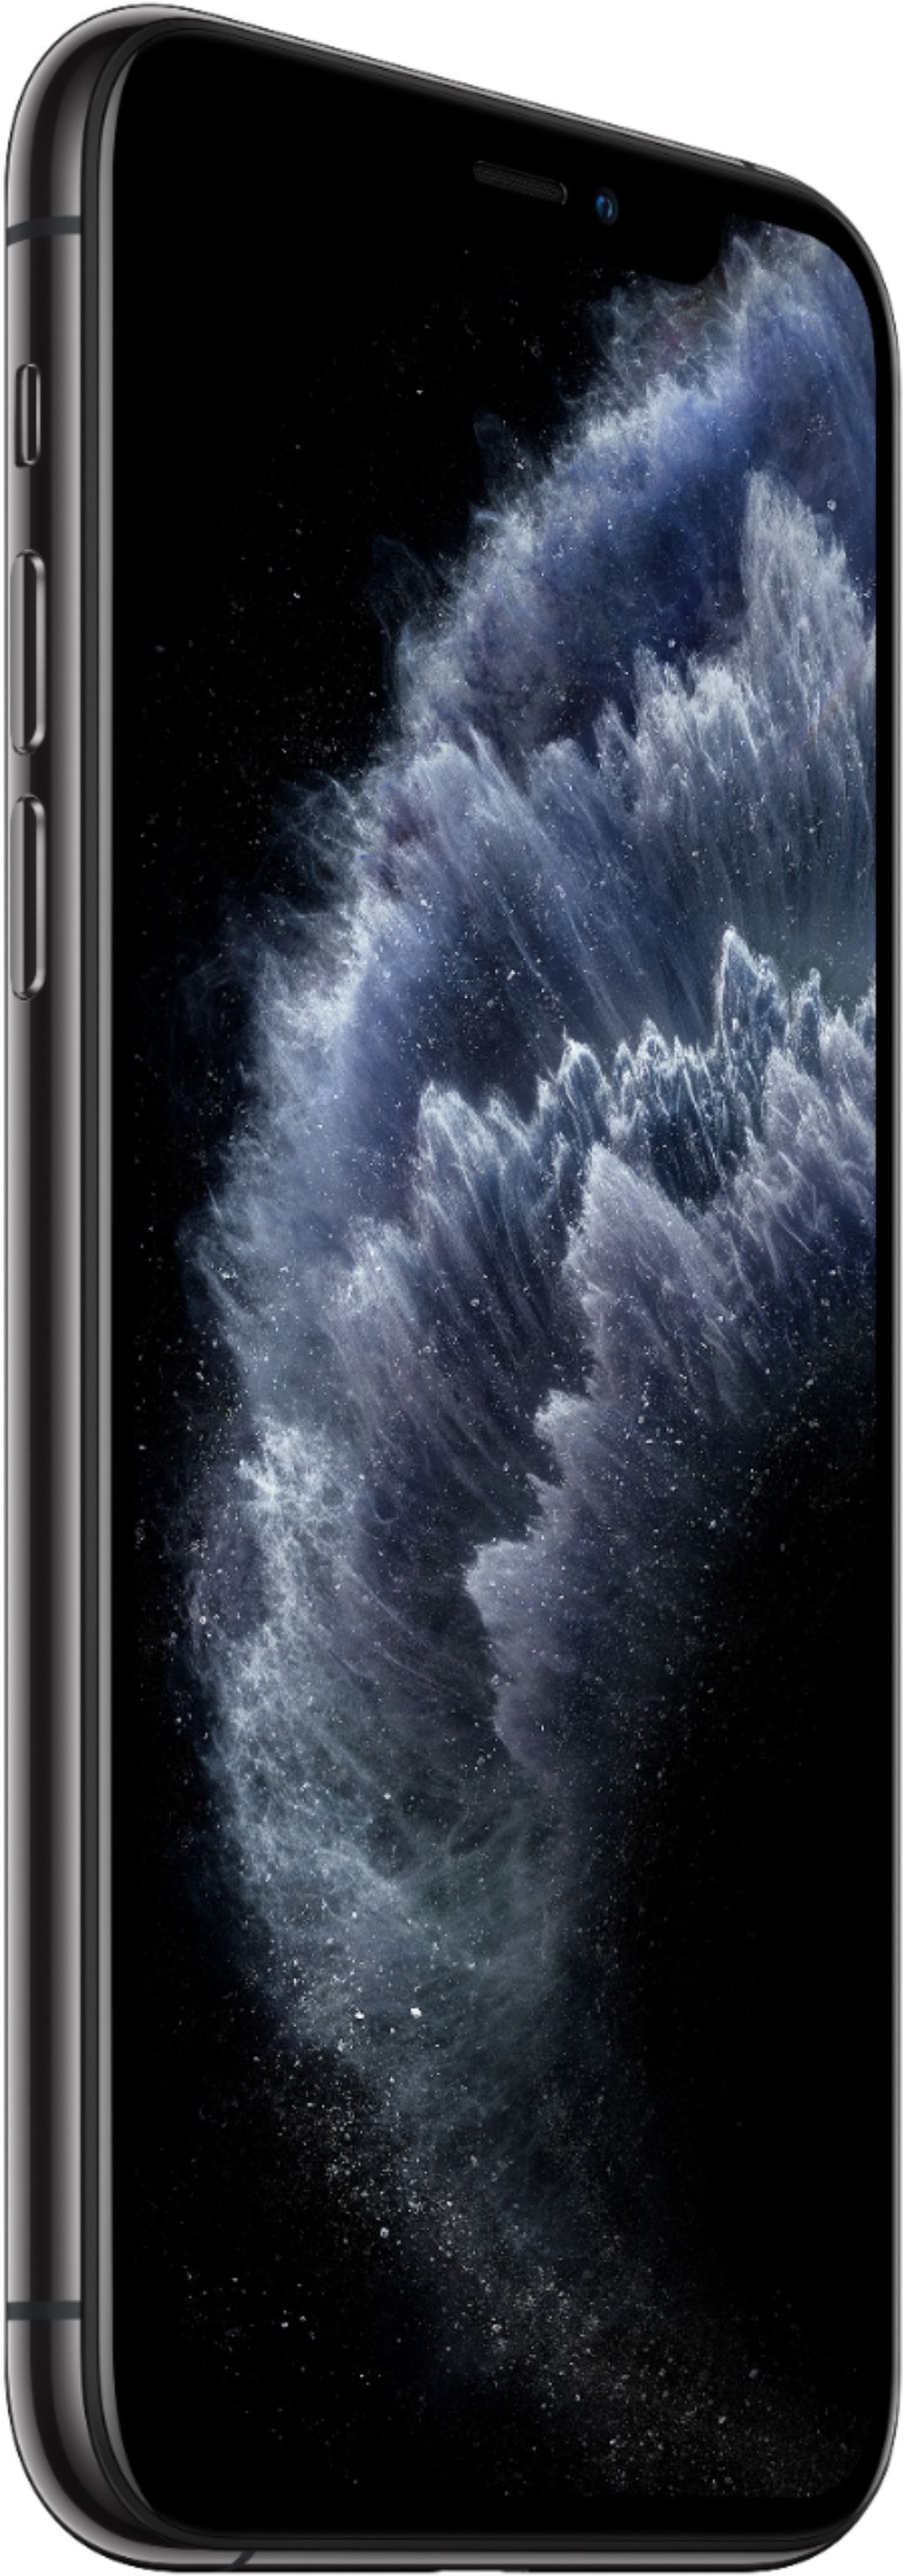 Best Buy: Apple iPhone 11 Pro 64GB Space Gray (AT&T) MWCH2LL/A